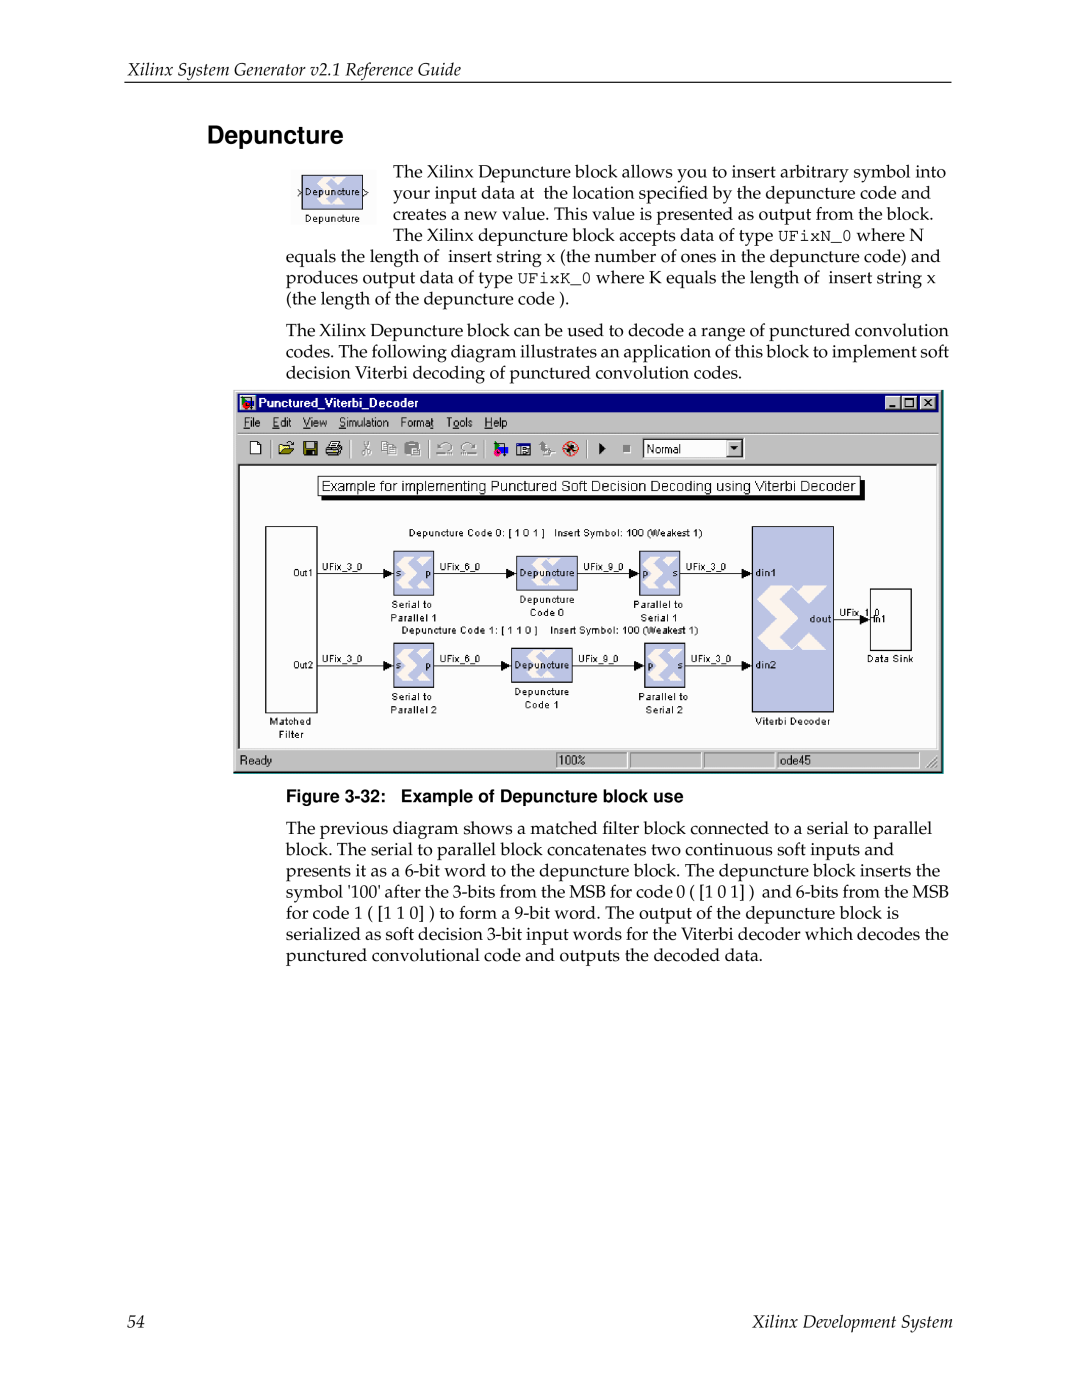 Xilinx V2.1 manual Xilinx System Generator v2.1 Reference Guide, 32:Example of Depuncture block use 